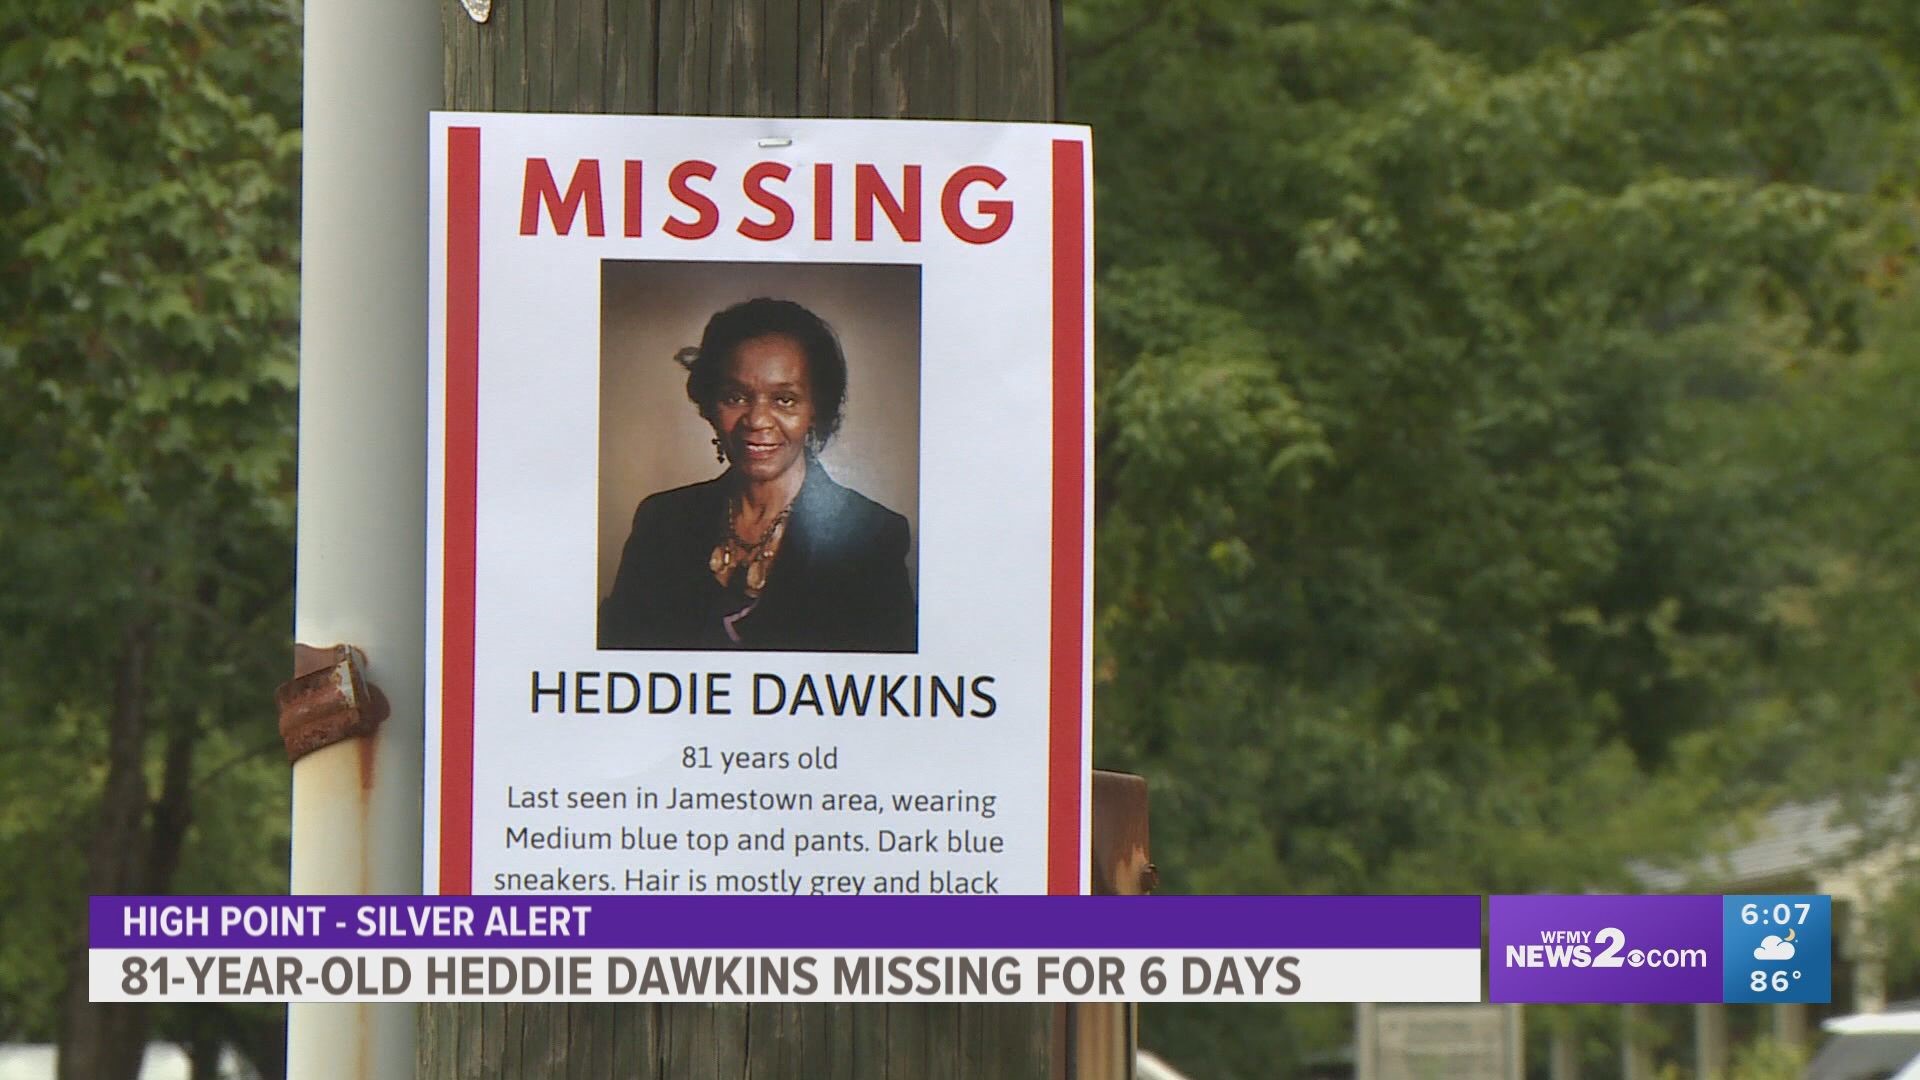 Heddie Dawkins, an 81-year-old woman with dementia, has been missing for 6 days.